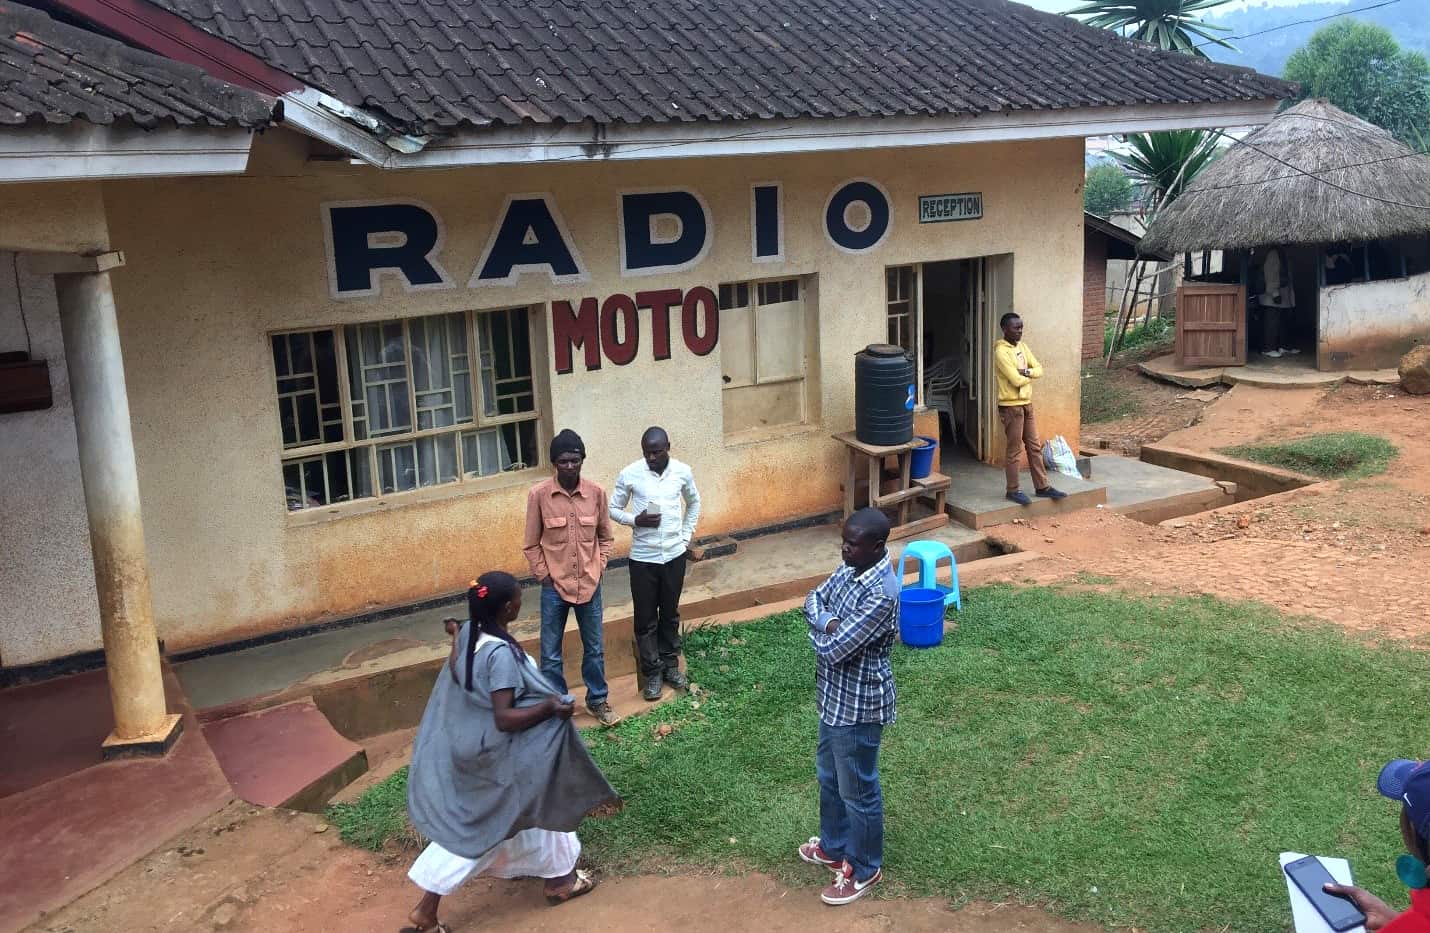 Four people stand in front of a small concrete building with a sign "Radio Moto"